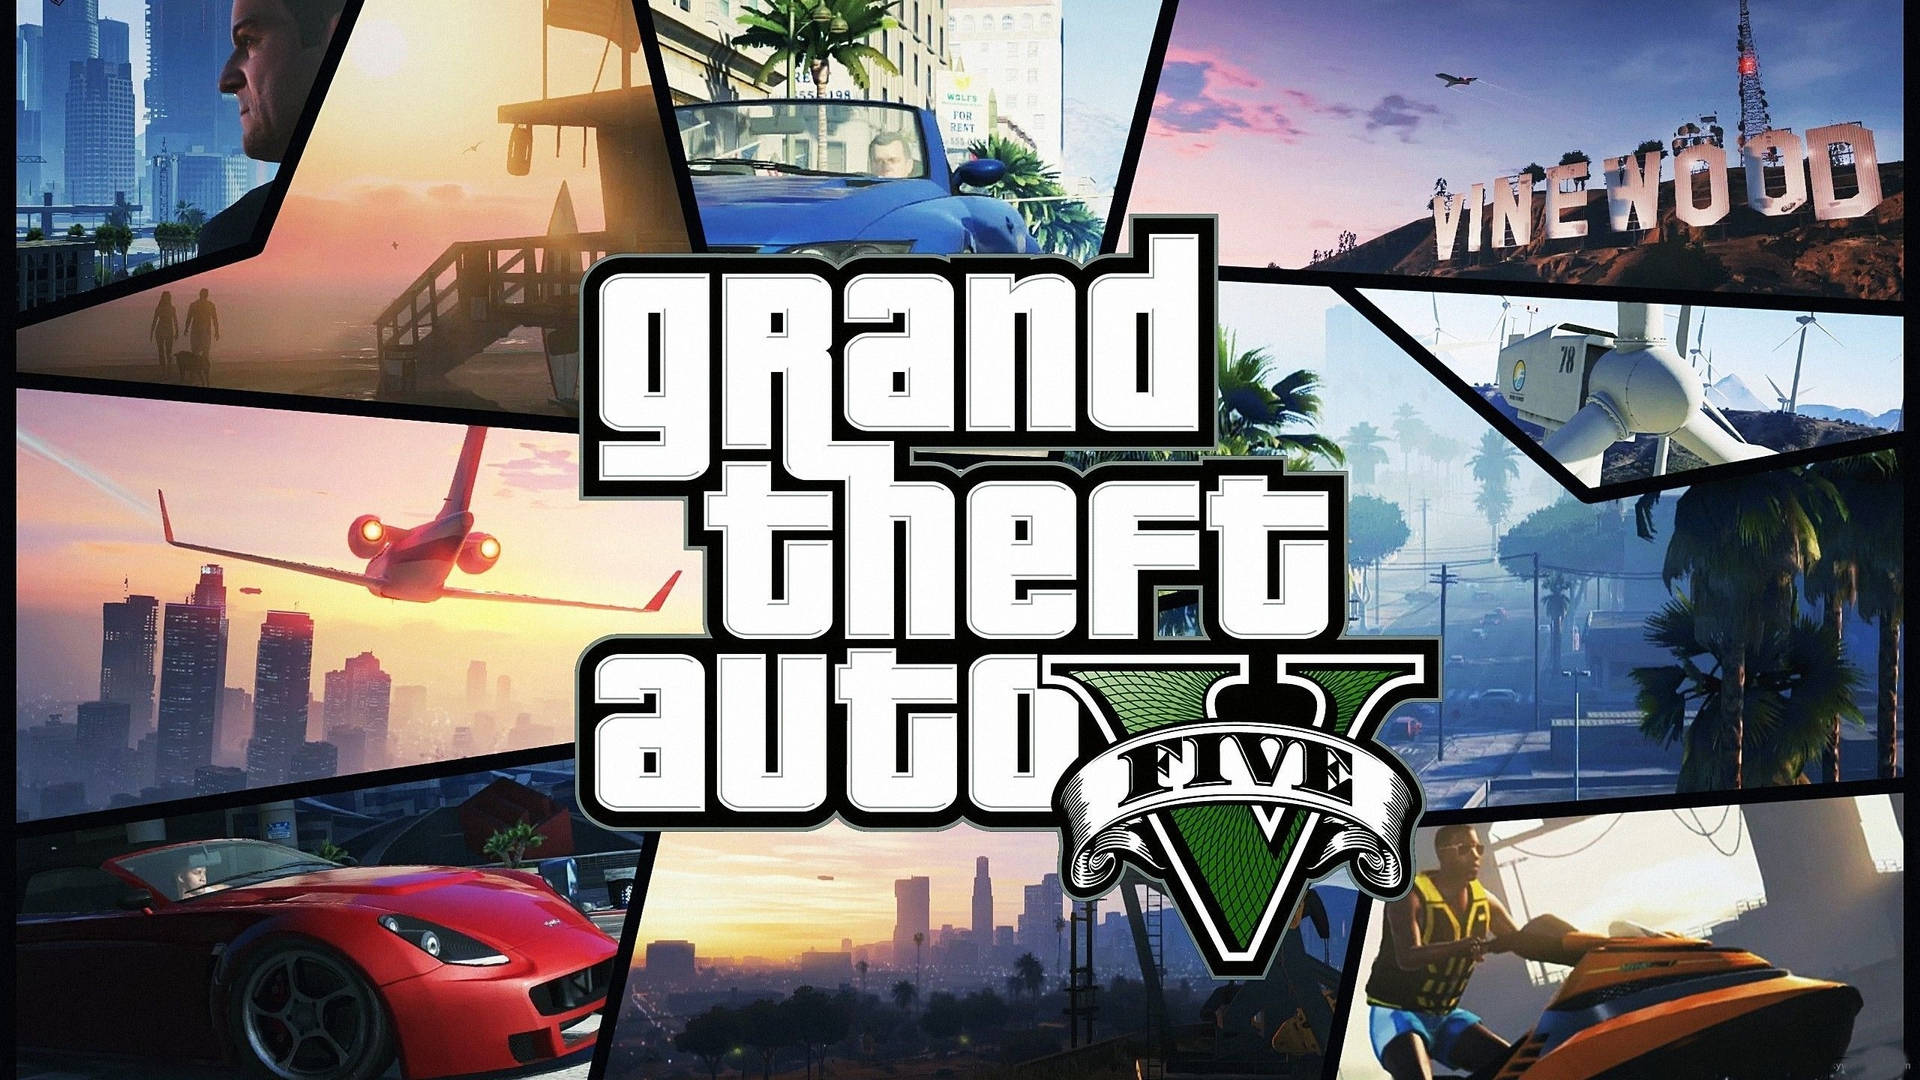 Gta 5 2560x1440 Vehicles And Settings Collage Picture